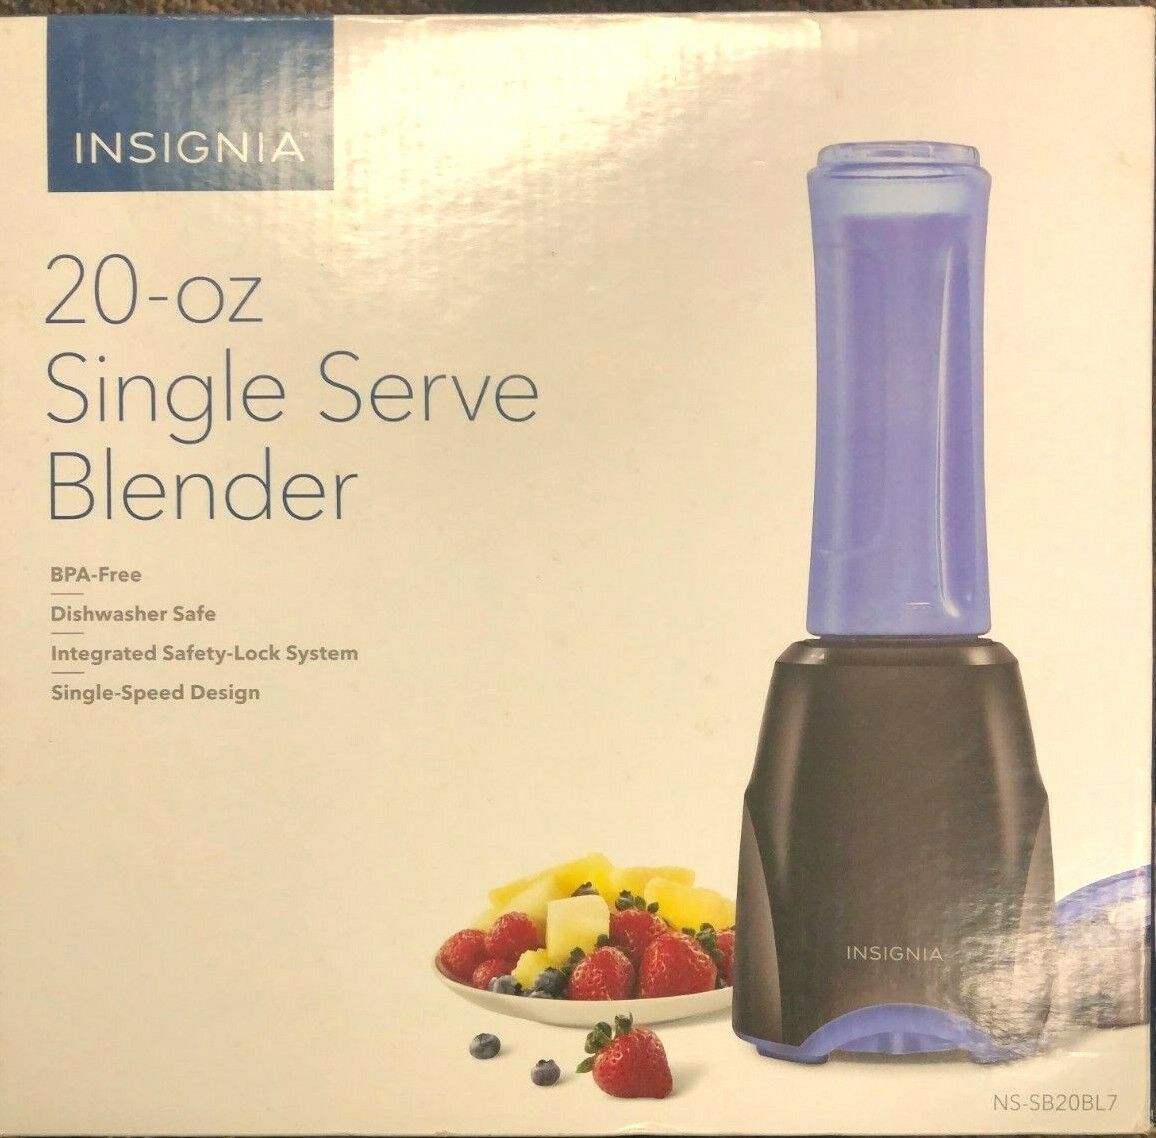 Primary image for LOT OF 4 Insignia 20-oz Single Serve Personal Blender & Travel Cup - Blue